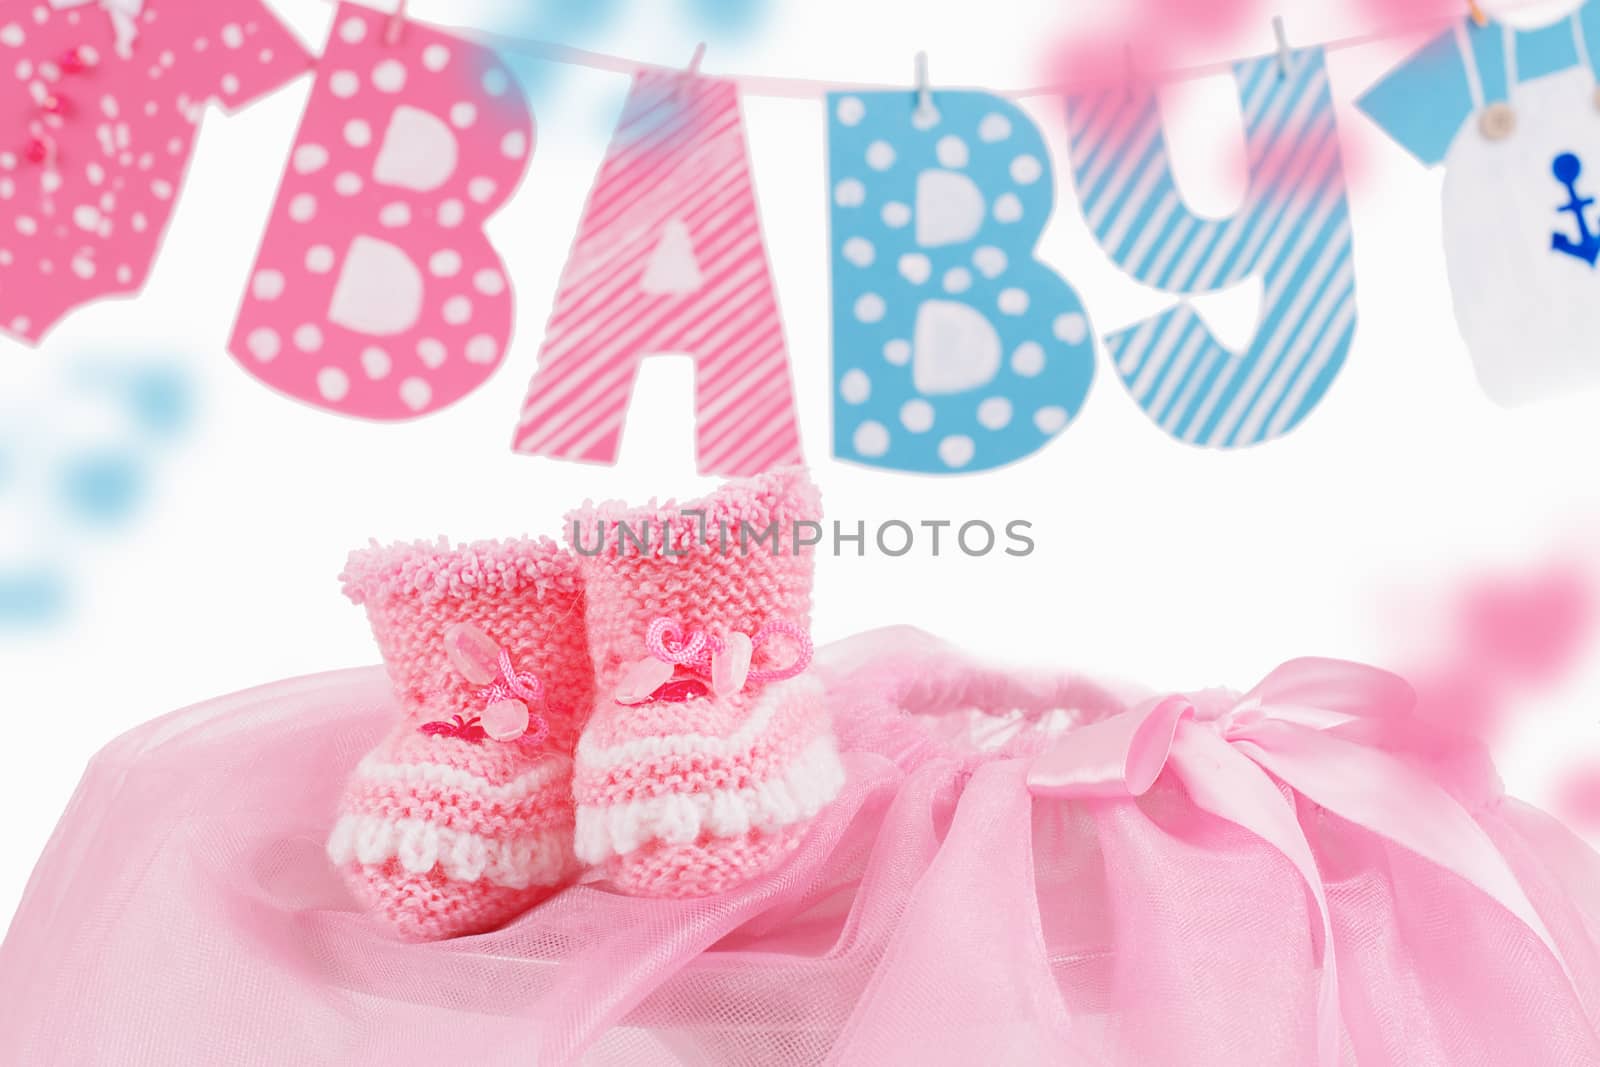 Cute baby element with word baby and pink bootees over white